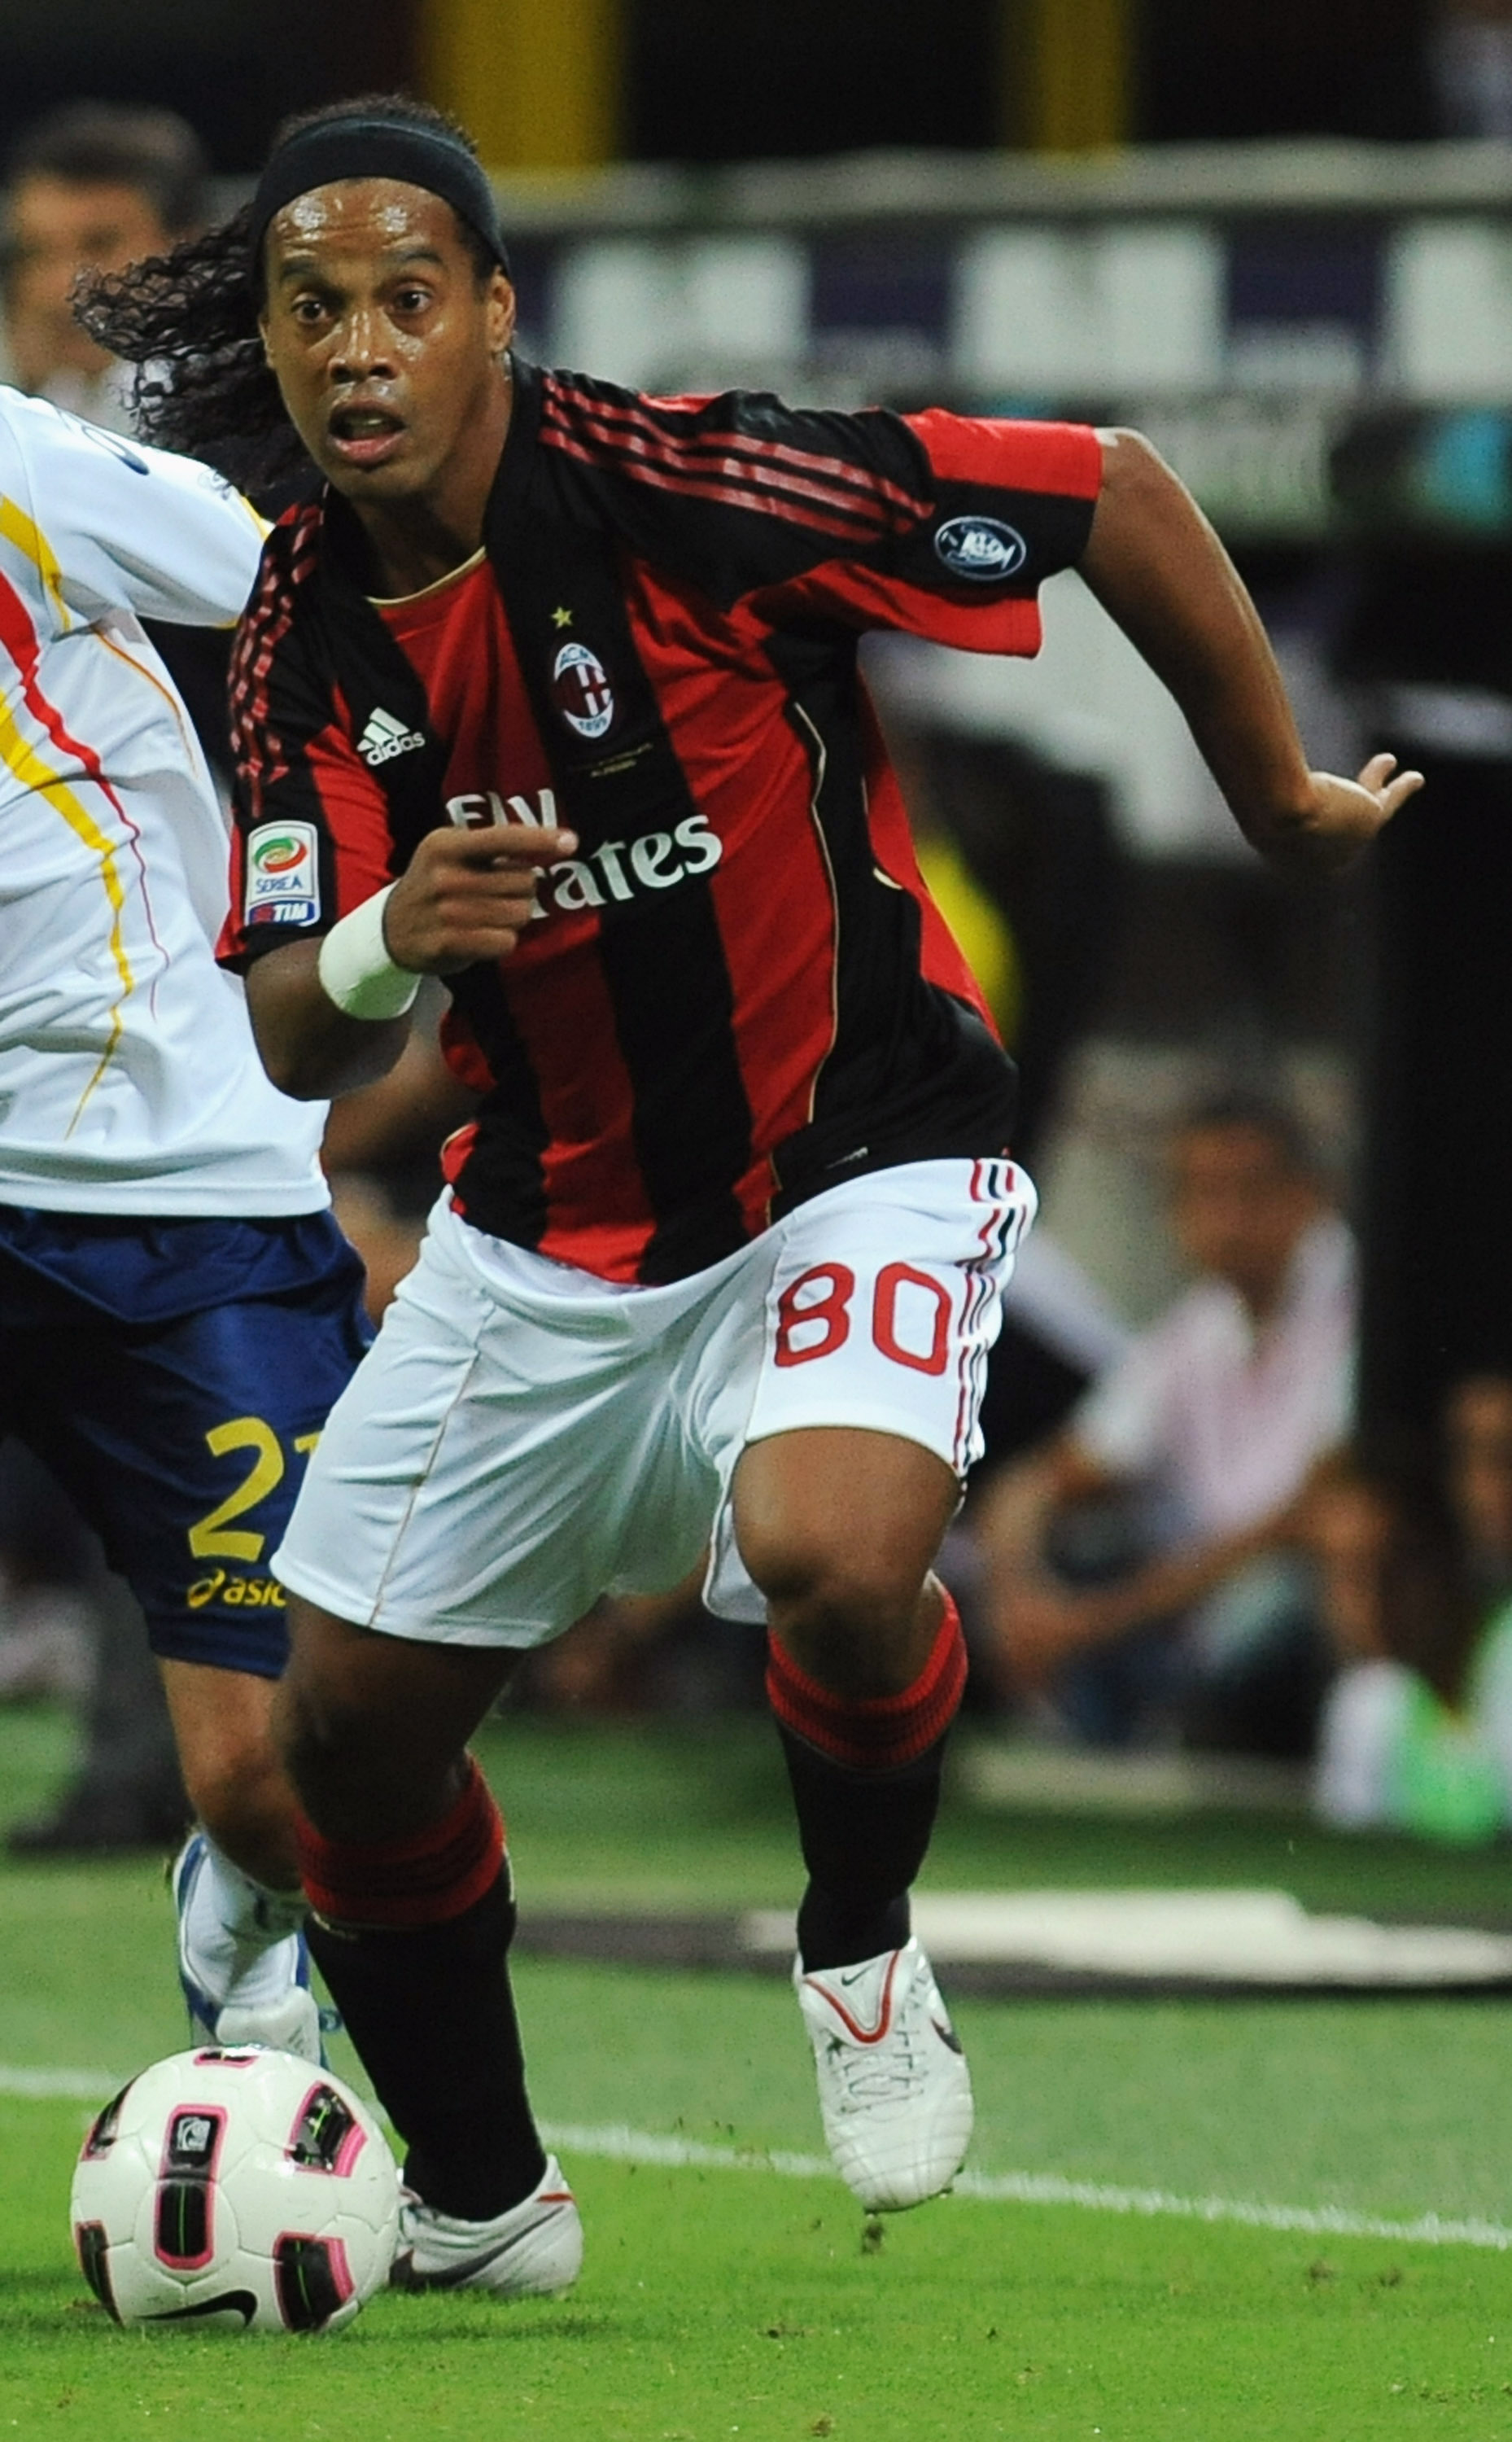 MILAN, ITALY - AUGUST 29:  Ronaldinho of AC Milan in action during the Serie A match between AC Milan and US Lecce at Stadio Giuseppe Meazza on August 29, 2010 in Milan, Italy.  (Photo by Valerio Pennicino/Getty Images)